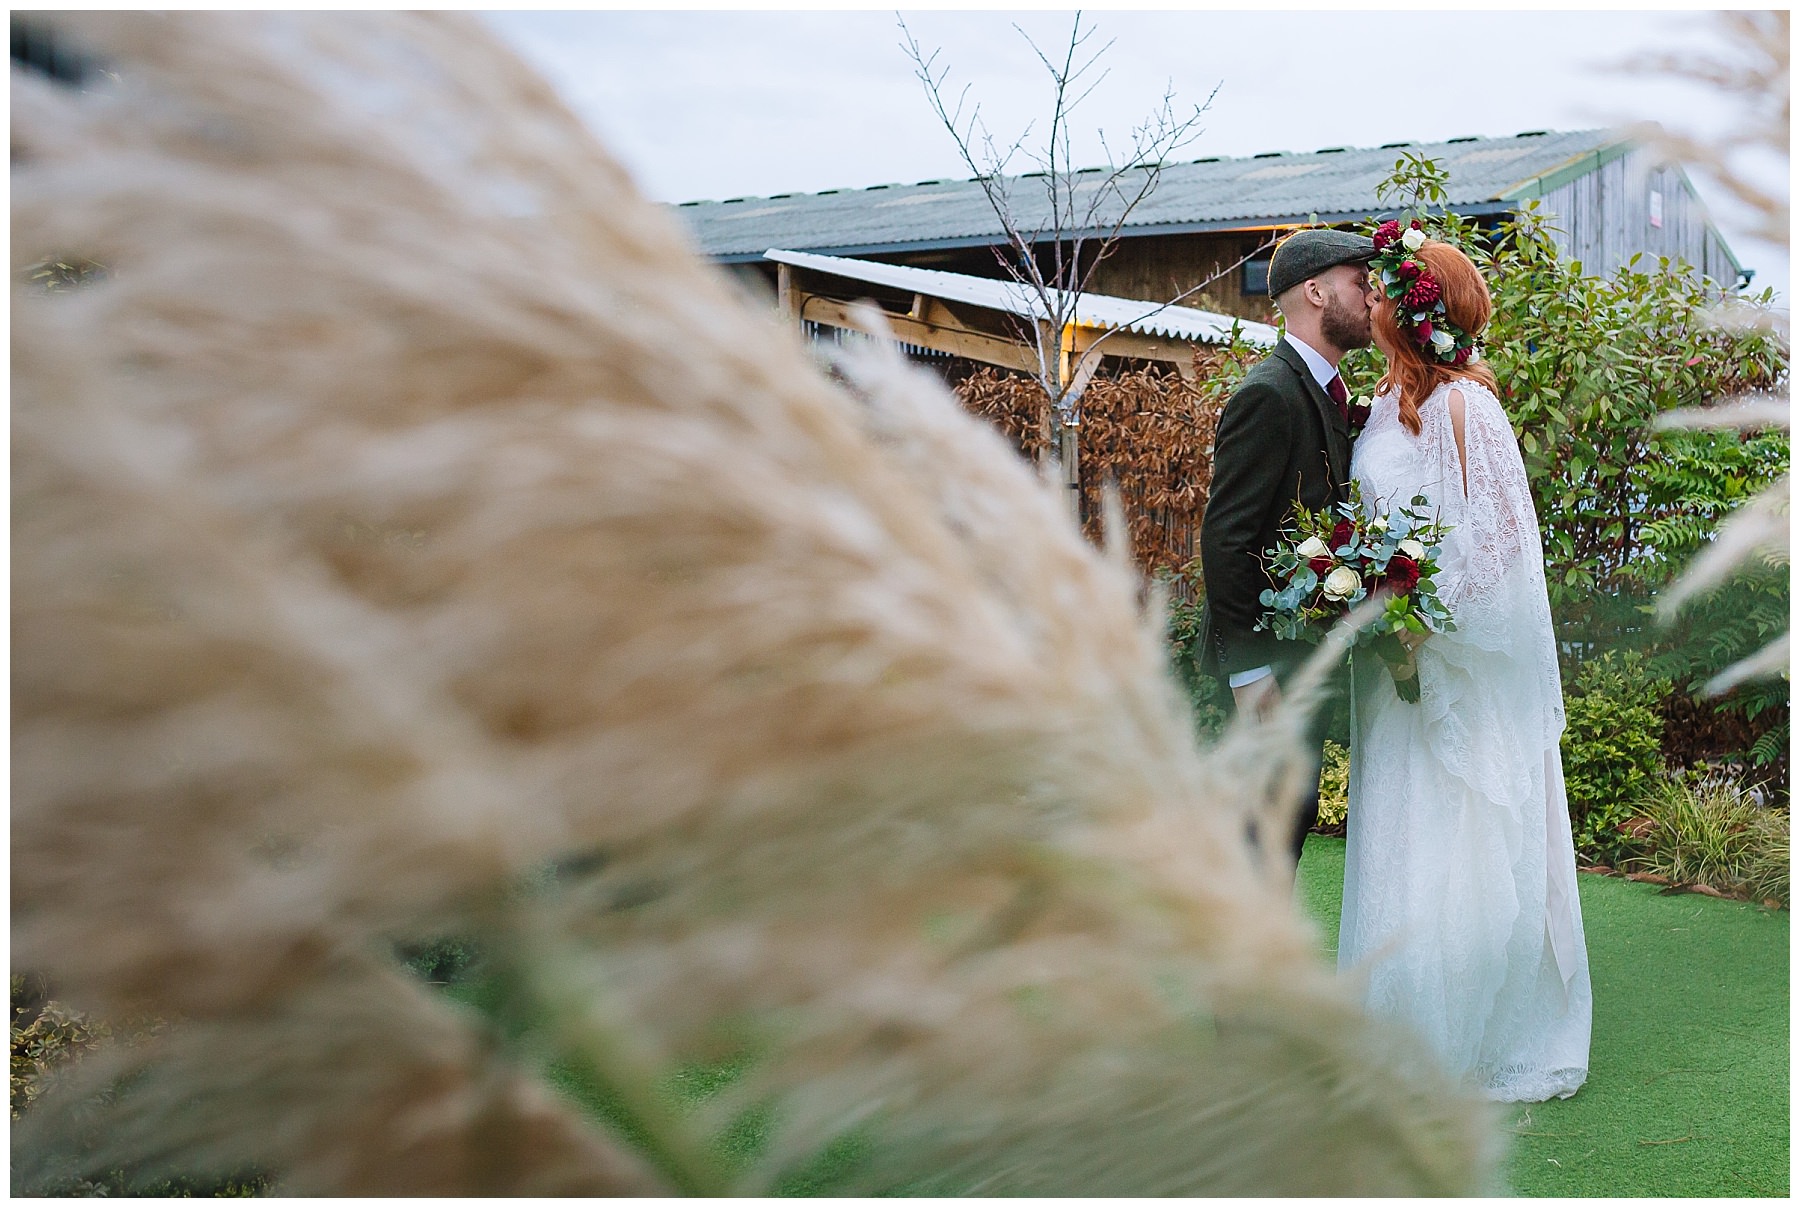 Kissing couple in the pampas grass